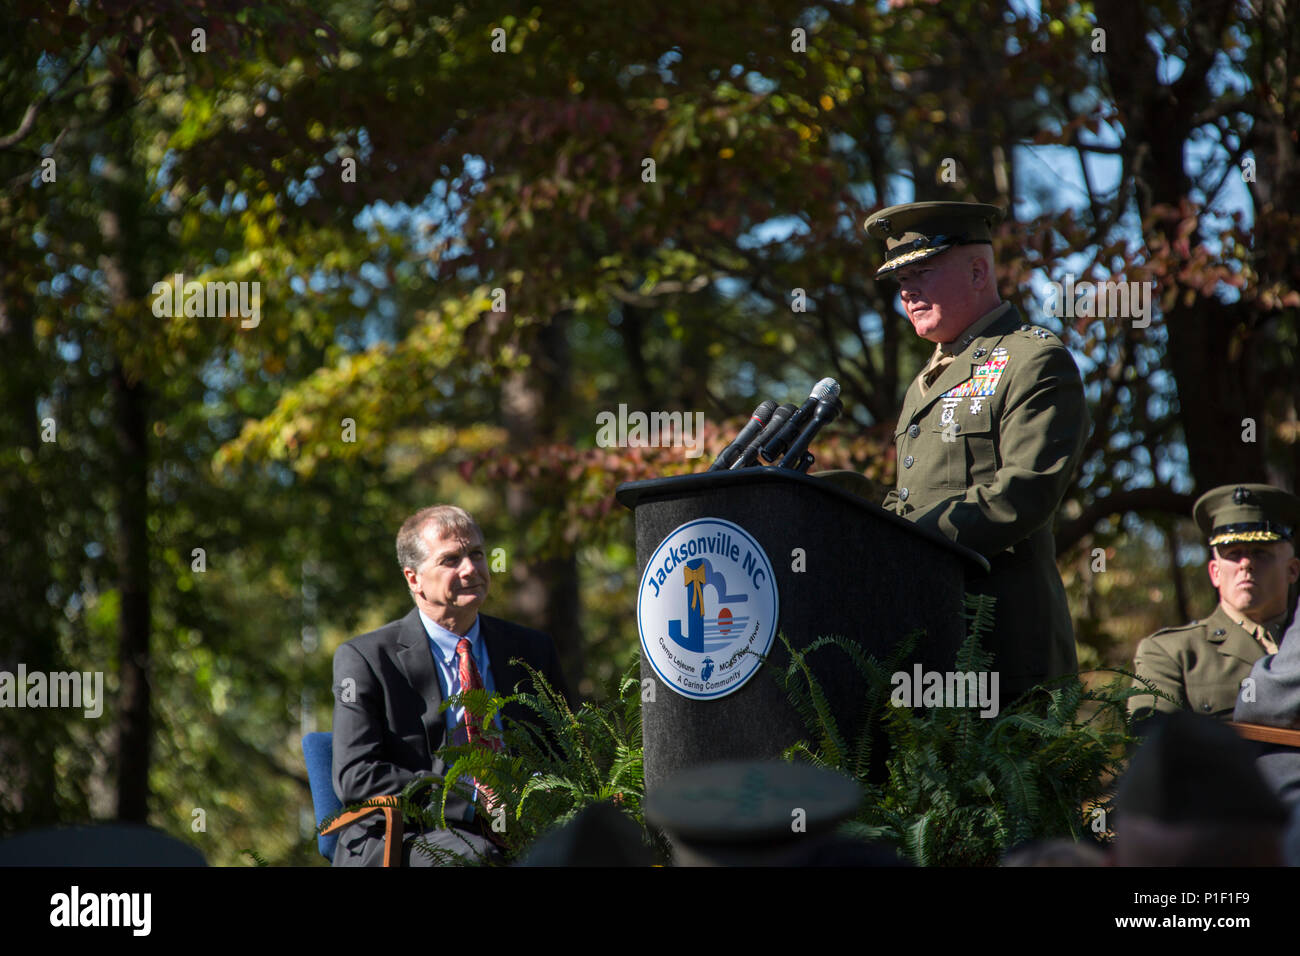 U.S. Marine Corps Maj. Gen. Walter L. Miller Jr., commanding general, II Marine Expeditionary Force, speaks during the 33rd Beirut Memorial Observance Ceremony, Lejeune Memorial Gardens, Jacksonville, N.C., Oct. 23, 2016. A memorial observance is held October 23rd of each year to remember those lives lost during the terrorist attack at U.S. Marine Barracks, Beirut, Lebanon, in 1983. (U.S. Marine Corps photo by Lance Cpl. Austin M. Livingston) Stock Photo